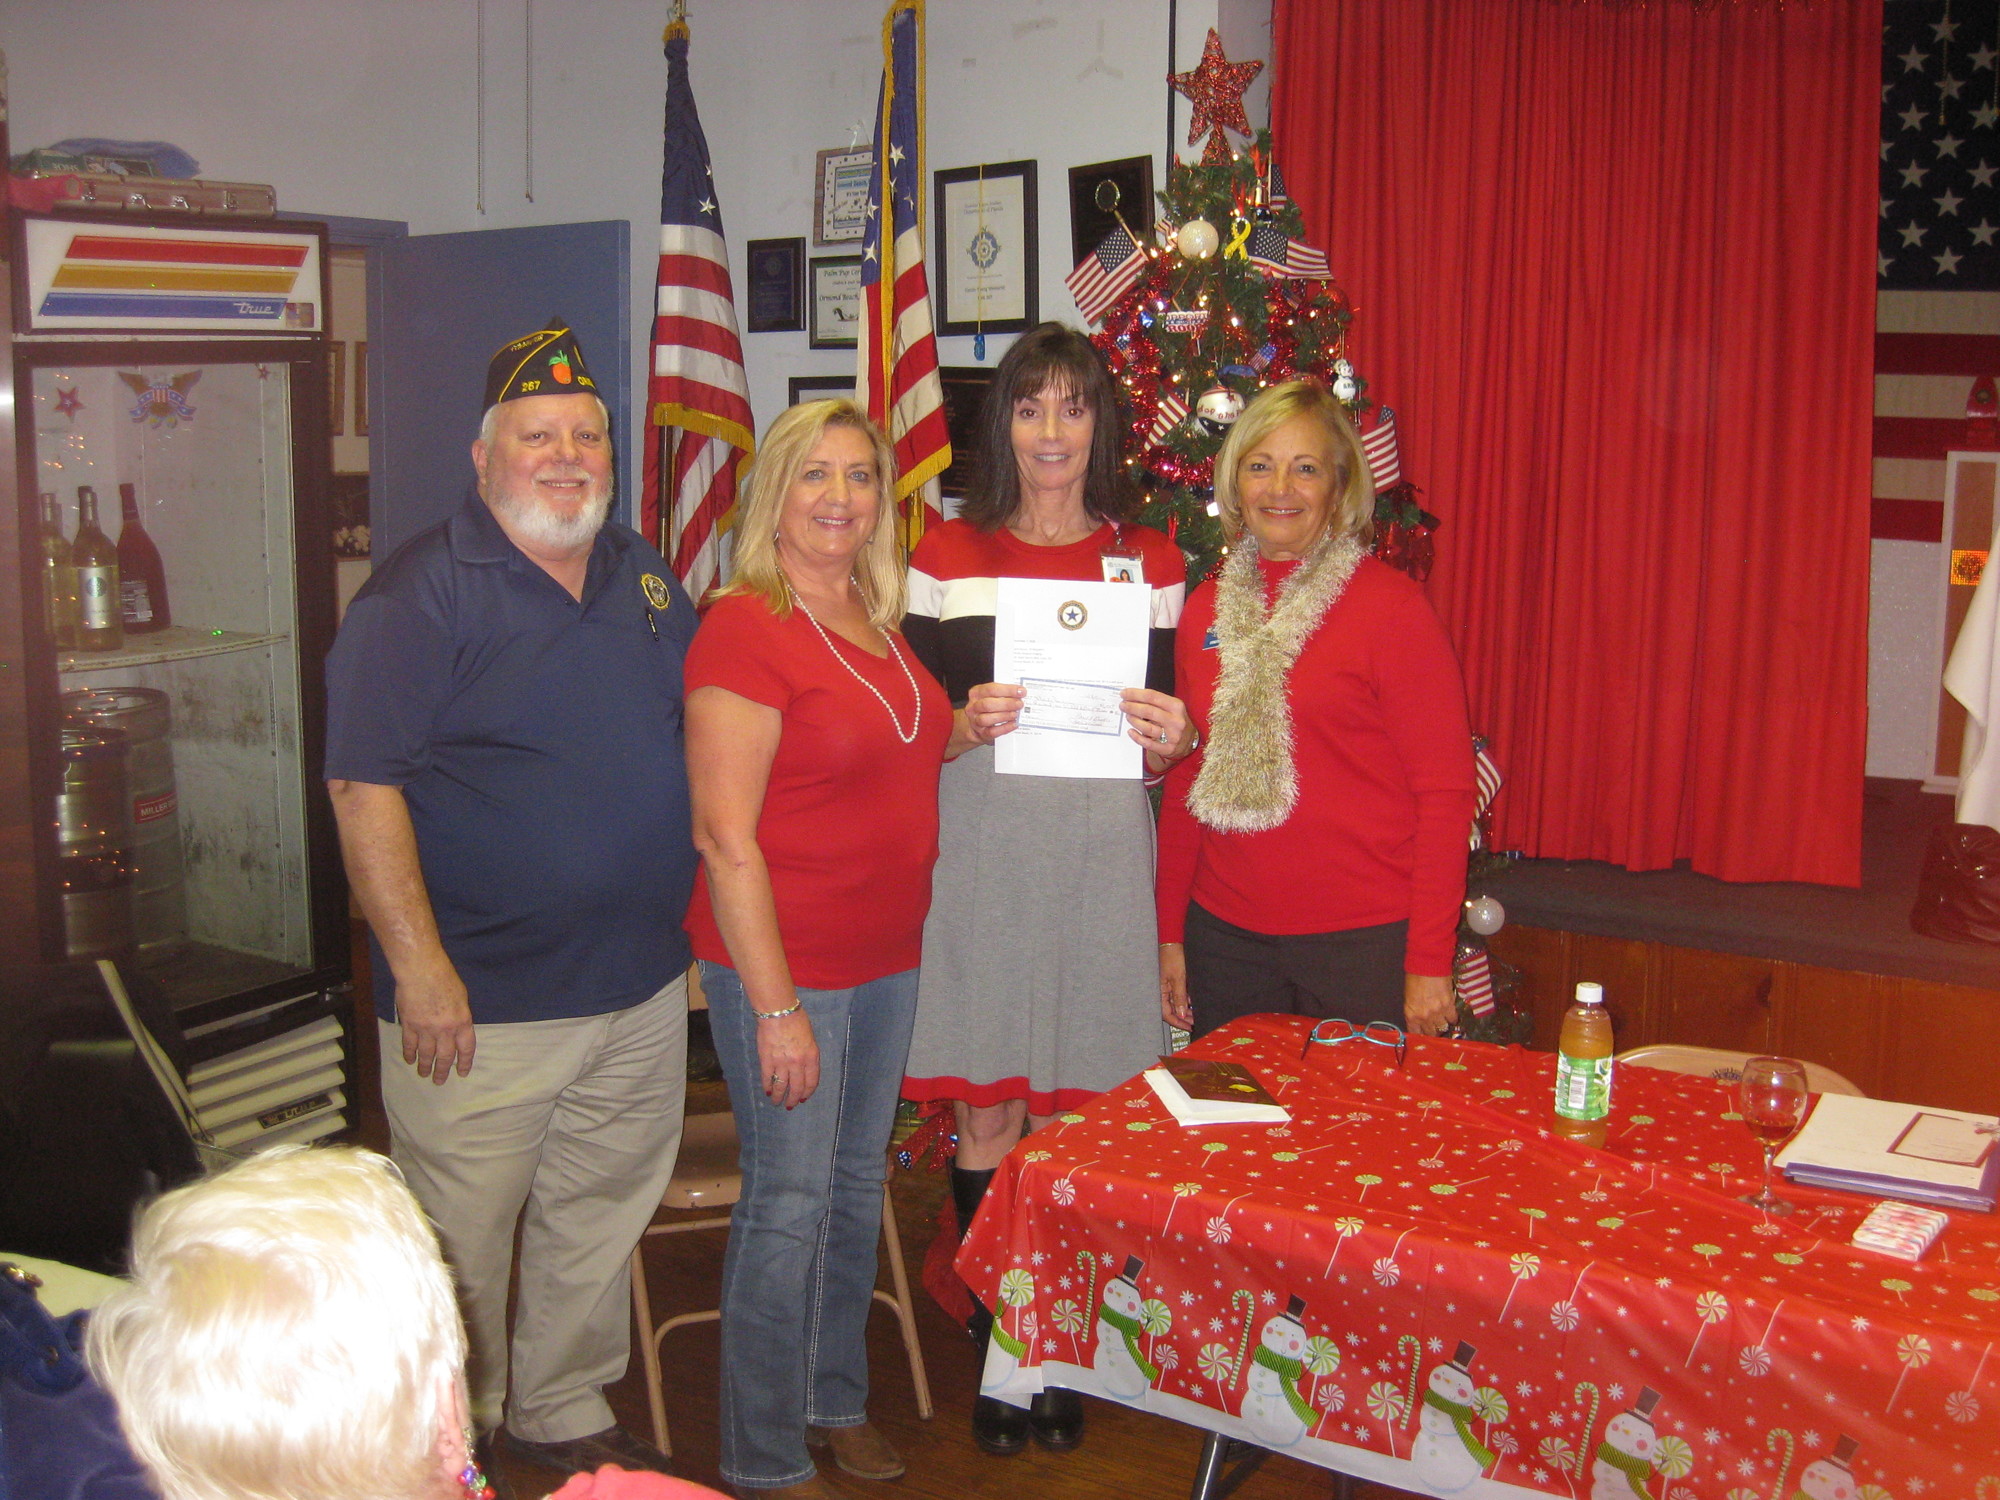 Post Commander Jim Bowers, Event Chairperson Linda Blanco, Carol Rumer, from Florida Hospital and Auxiliary President Carol Stauffer at the check presentation. Photo courtesy of the American Legion Auxiliary Post no. 267